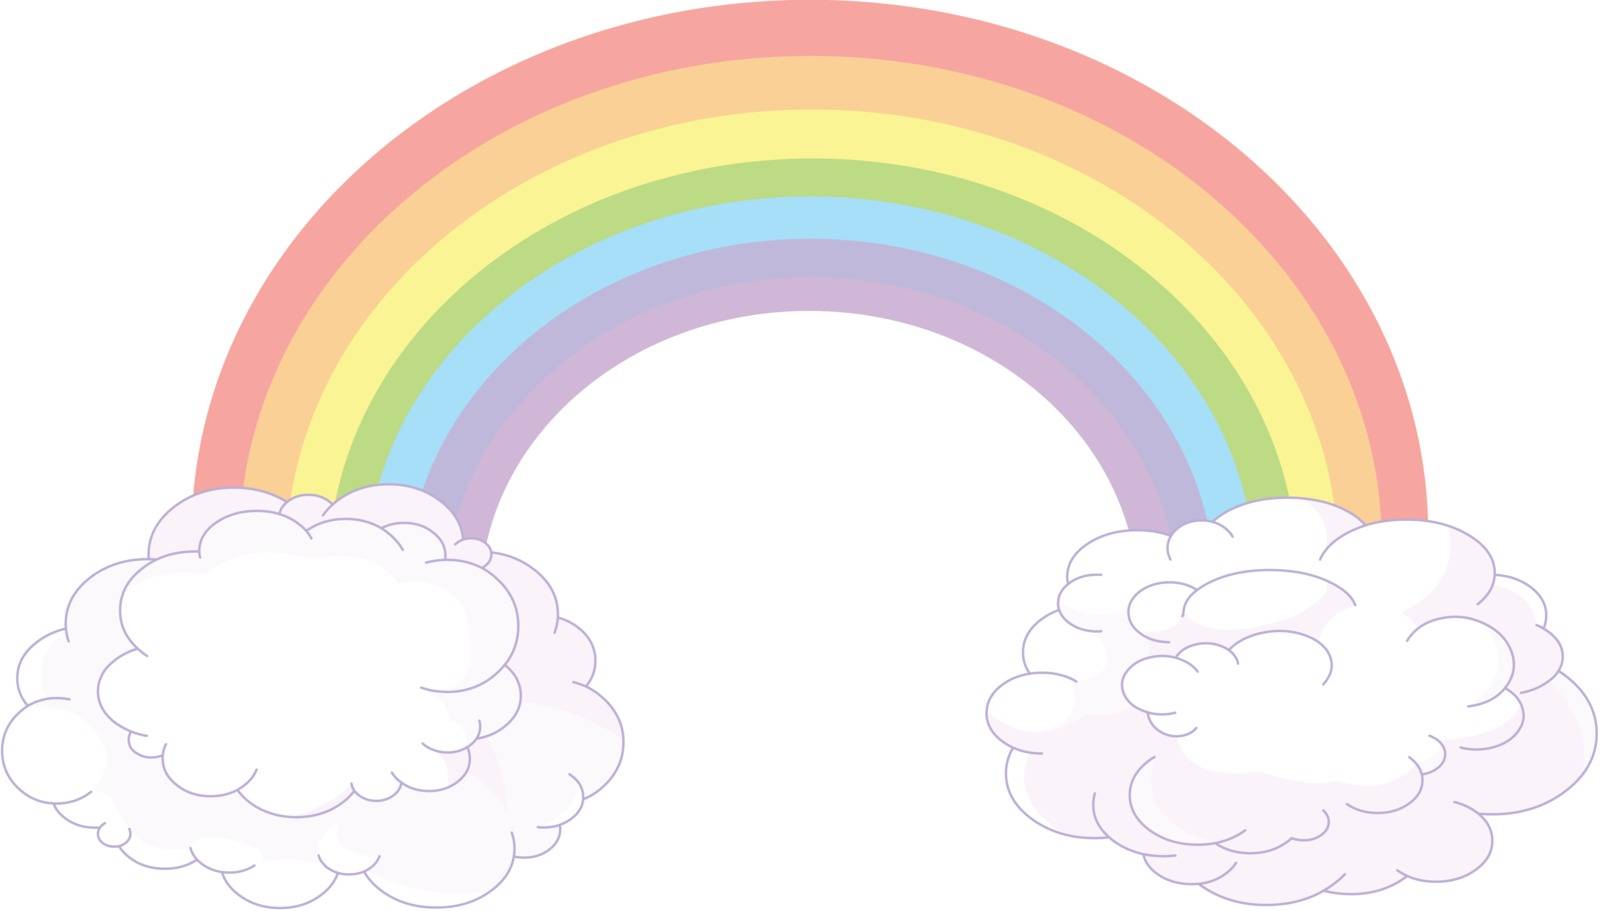 Illustration of rainbow in pastel colors